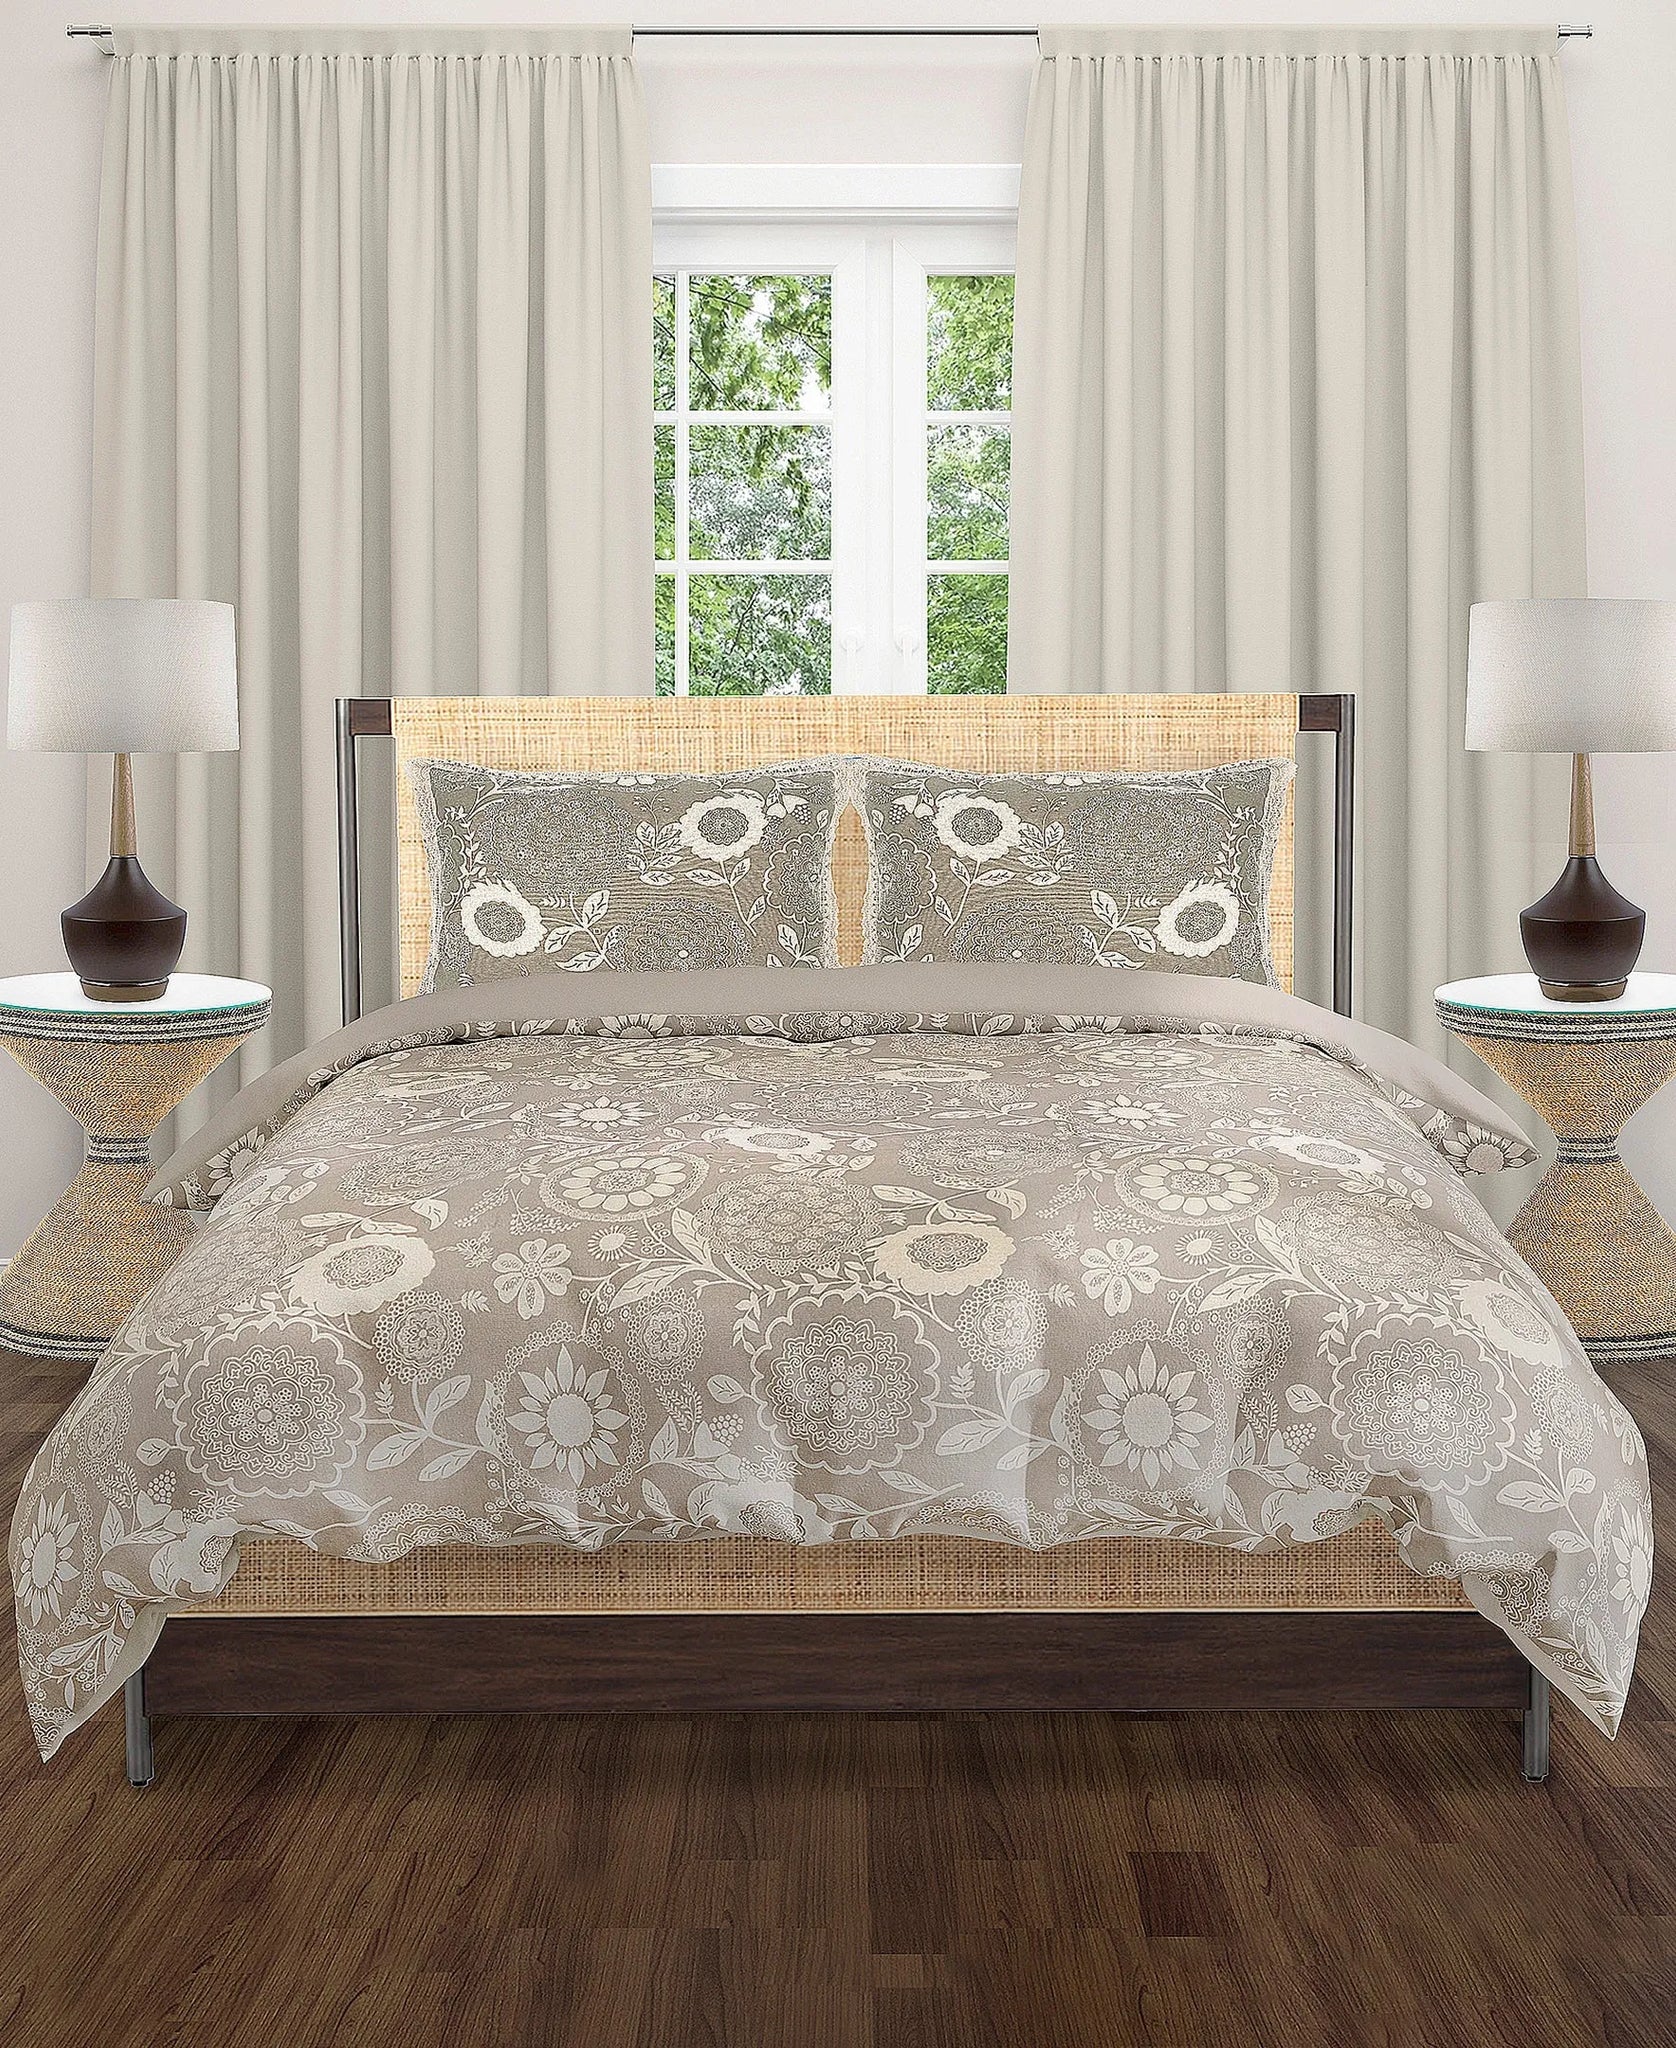 Full/Queen Bohemian Cotton Comforter, 88" X 92" - Old French Design home decor - Mod Lifestyles